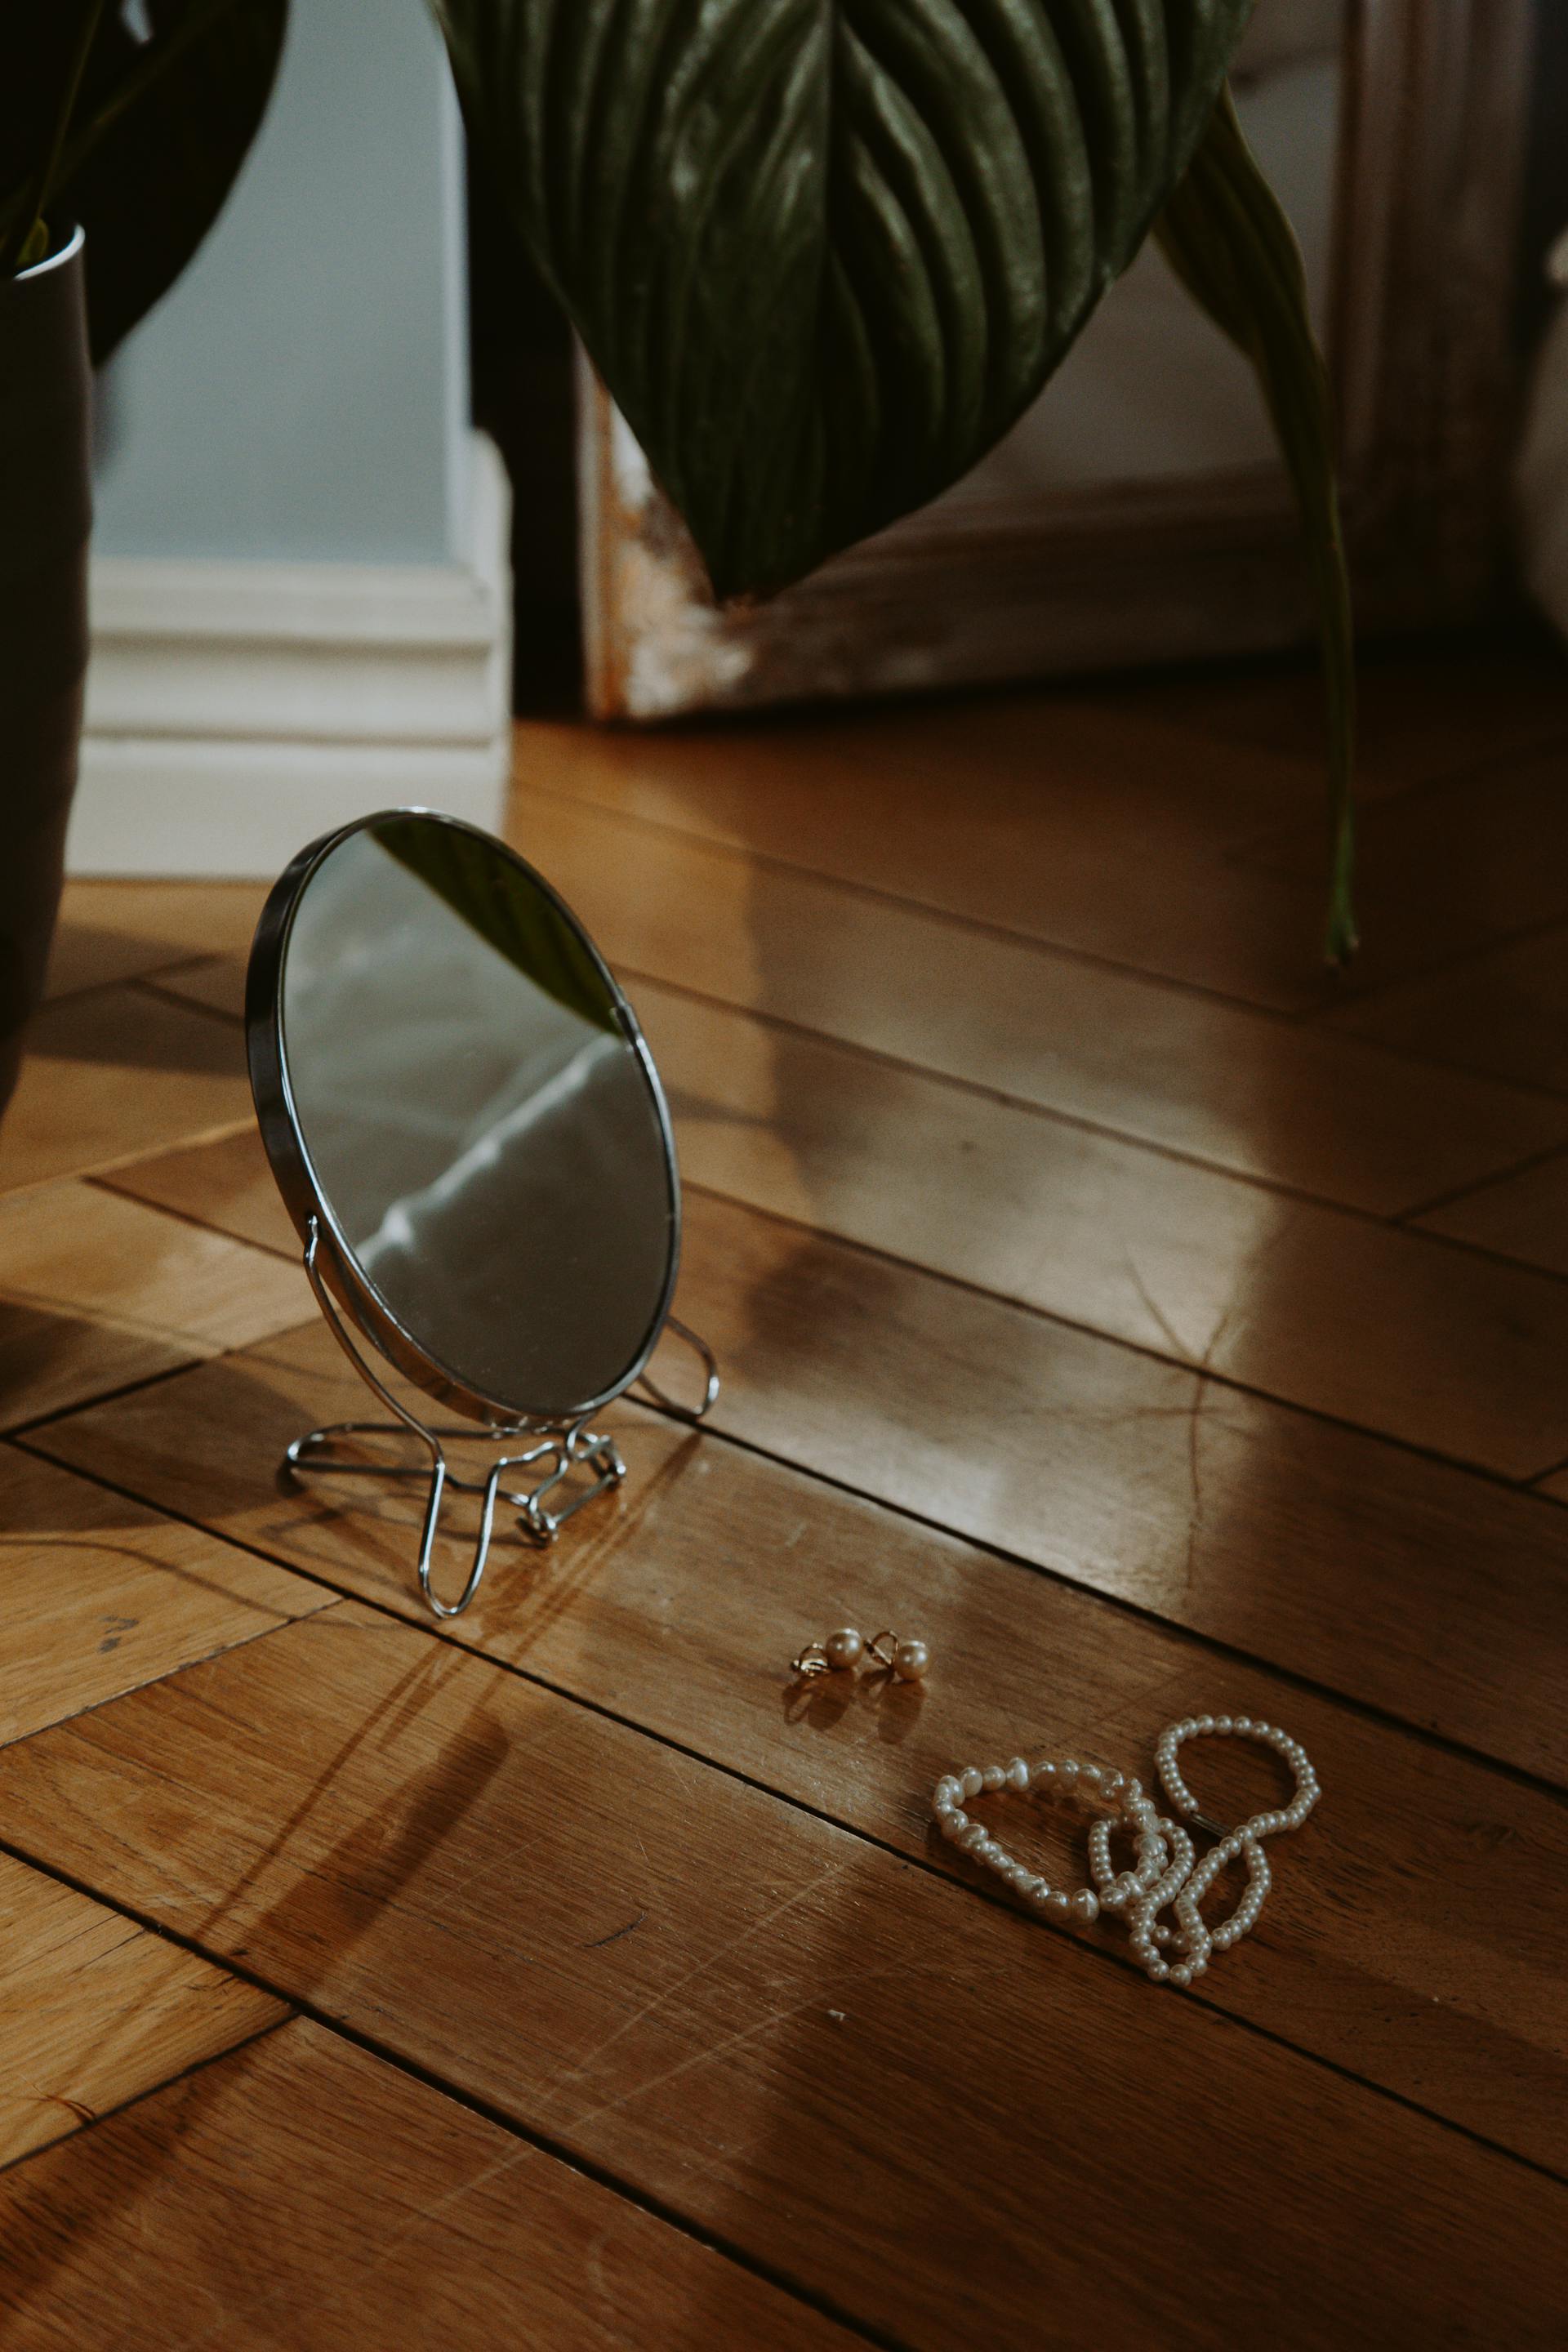 A sliver-framed round mirror and jewelry items lying on the wooden floor | Source: Pexels